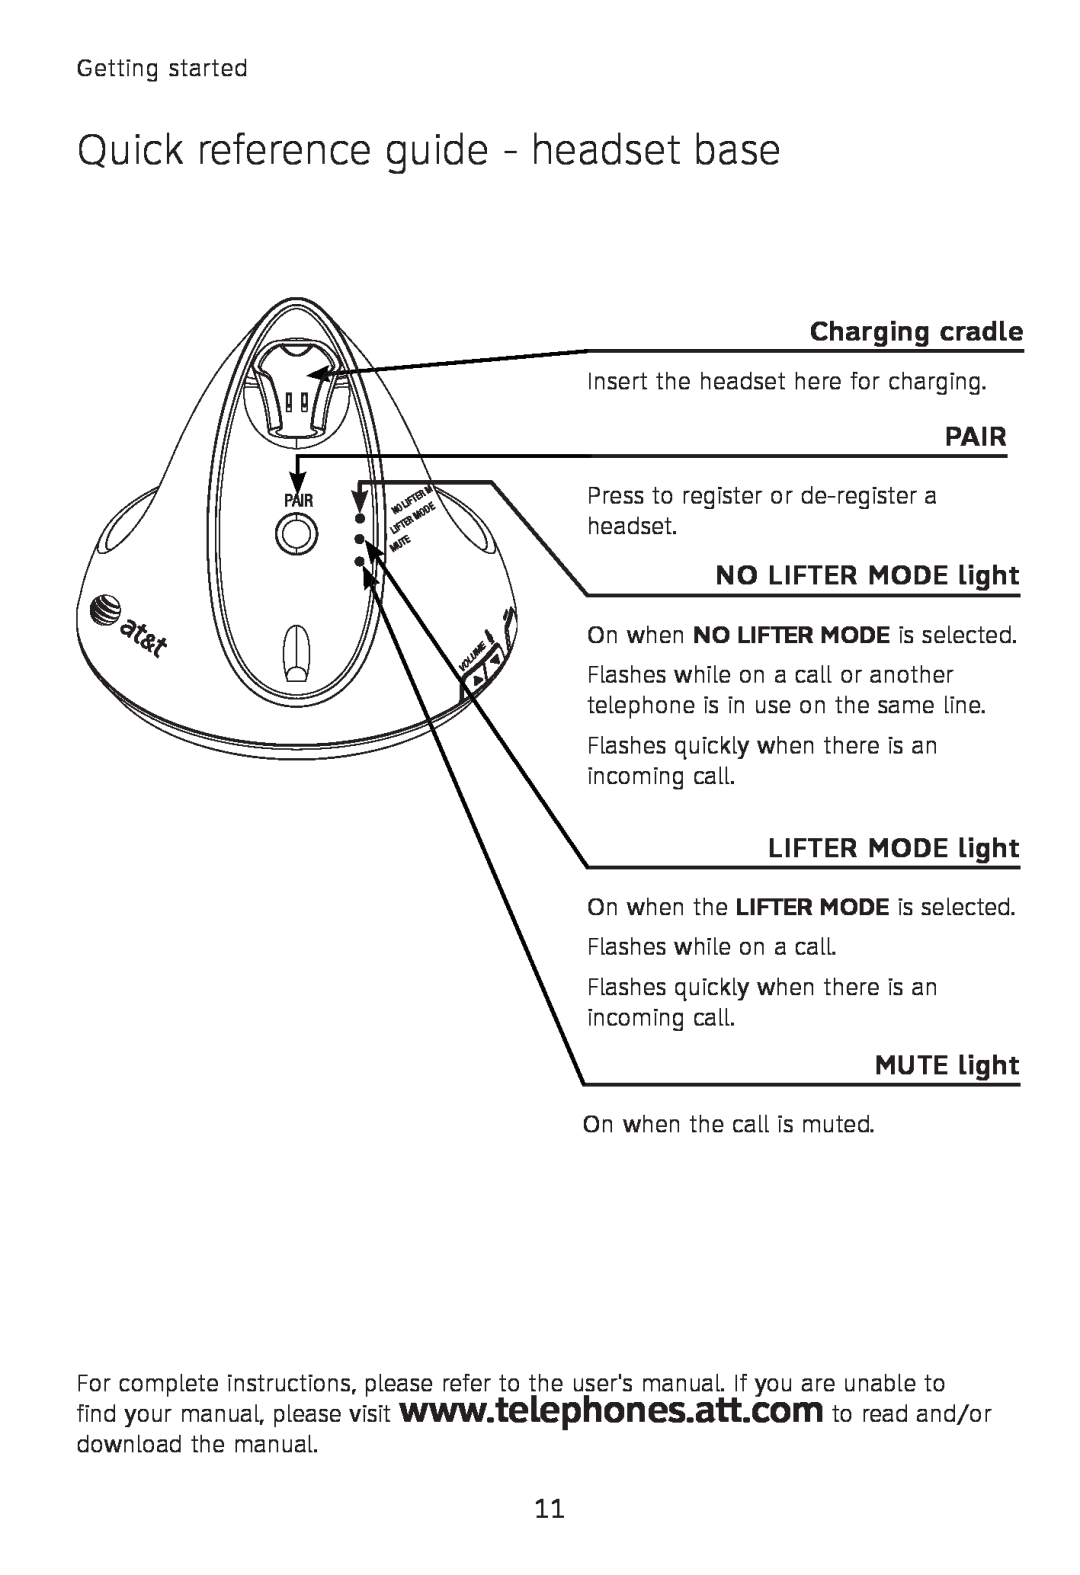 AT&T TL760 quick start Quick reference guide - headset base, Charging cradle, Pair, NO LIFTER MODE light, MUTE light 